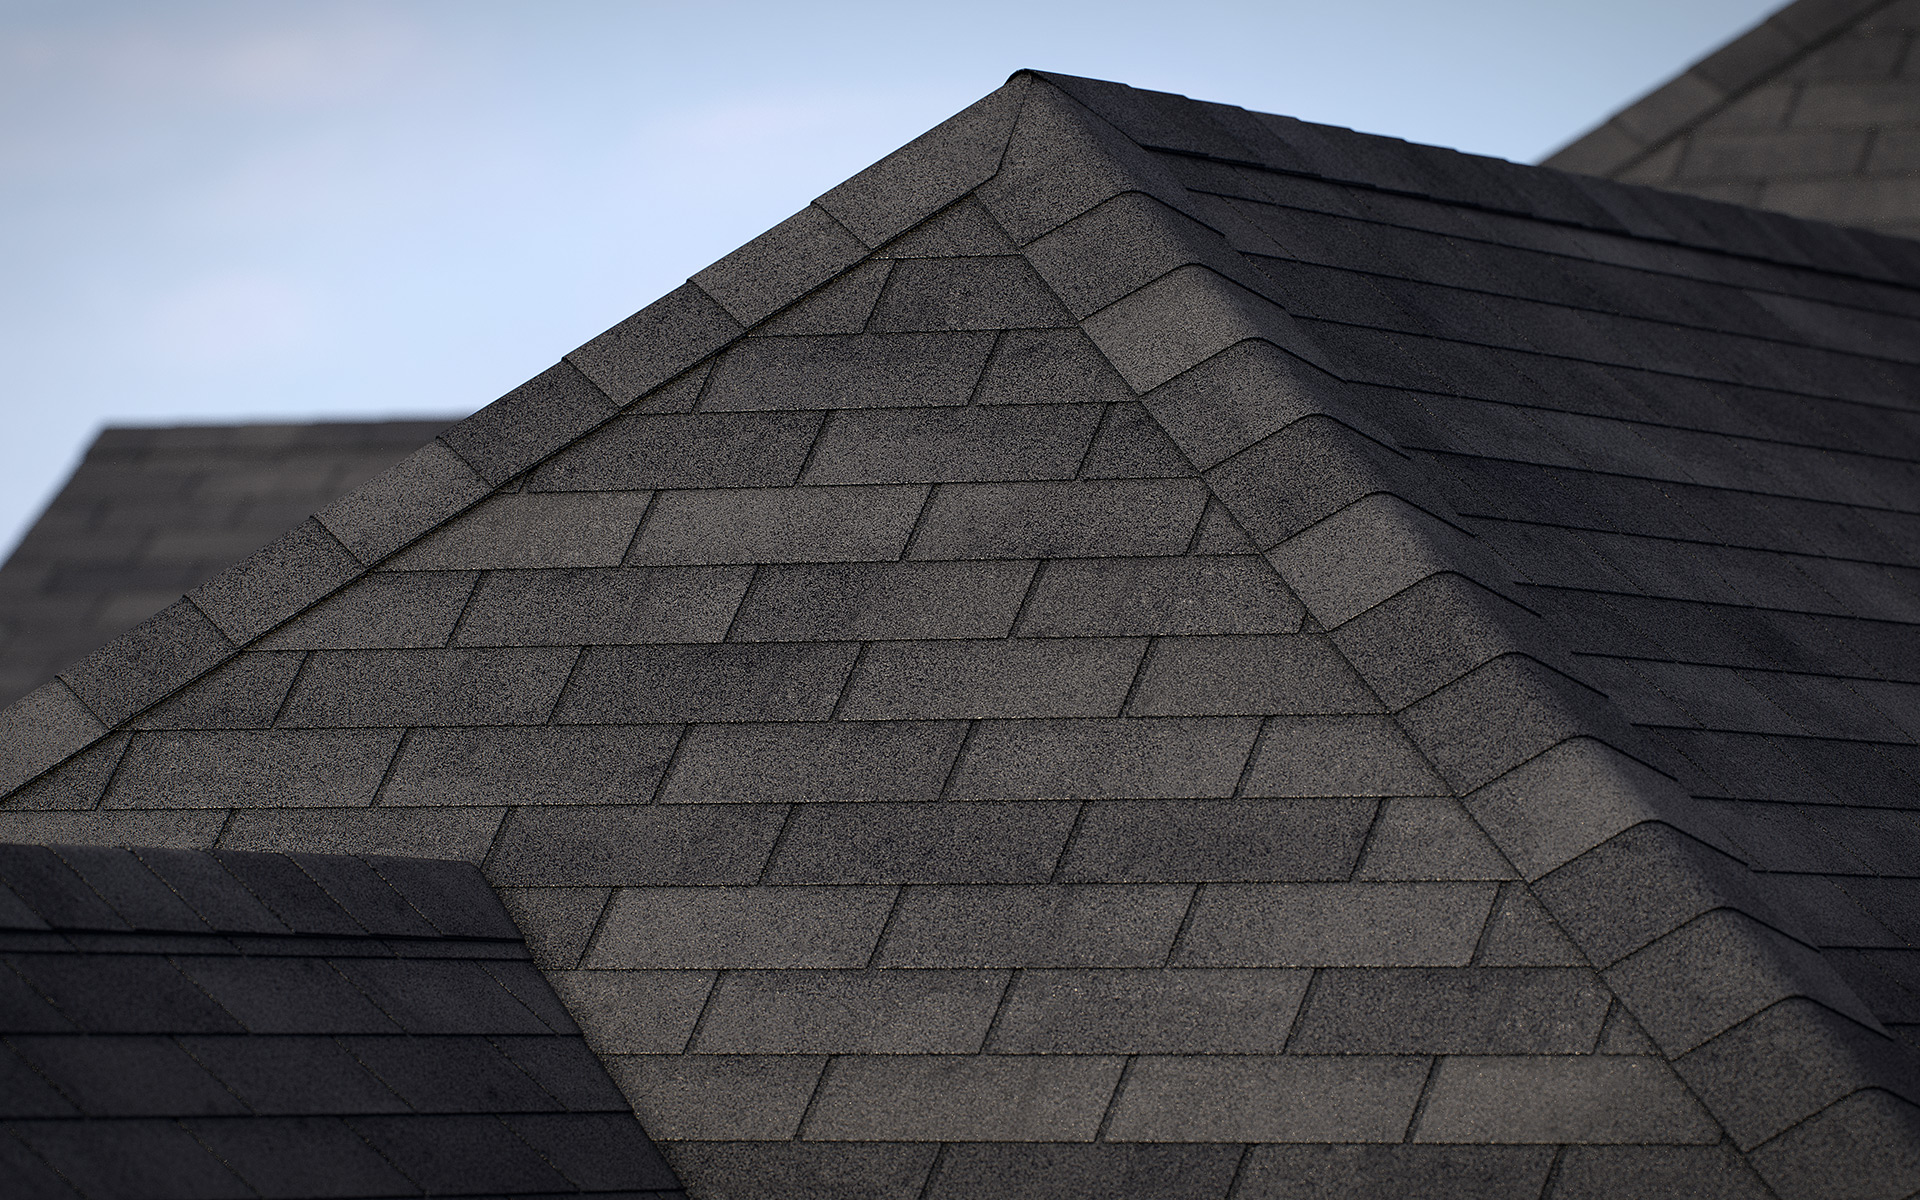 3-tab asphalt roof shingles black color 3D model preset for 3dsmax and RailClone. Rendered with vray, made for arch-viz.